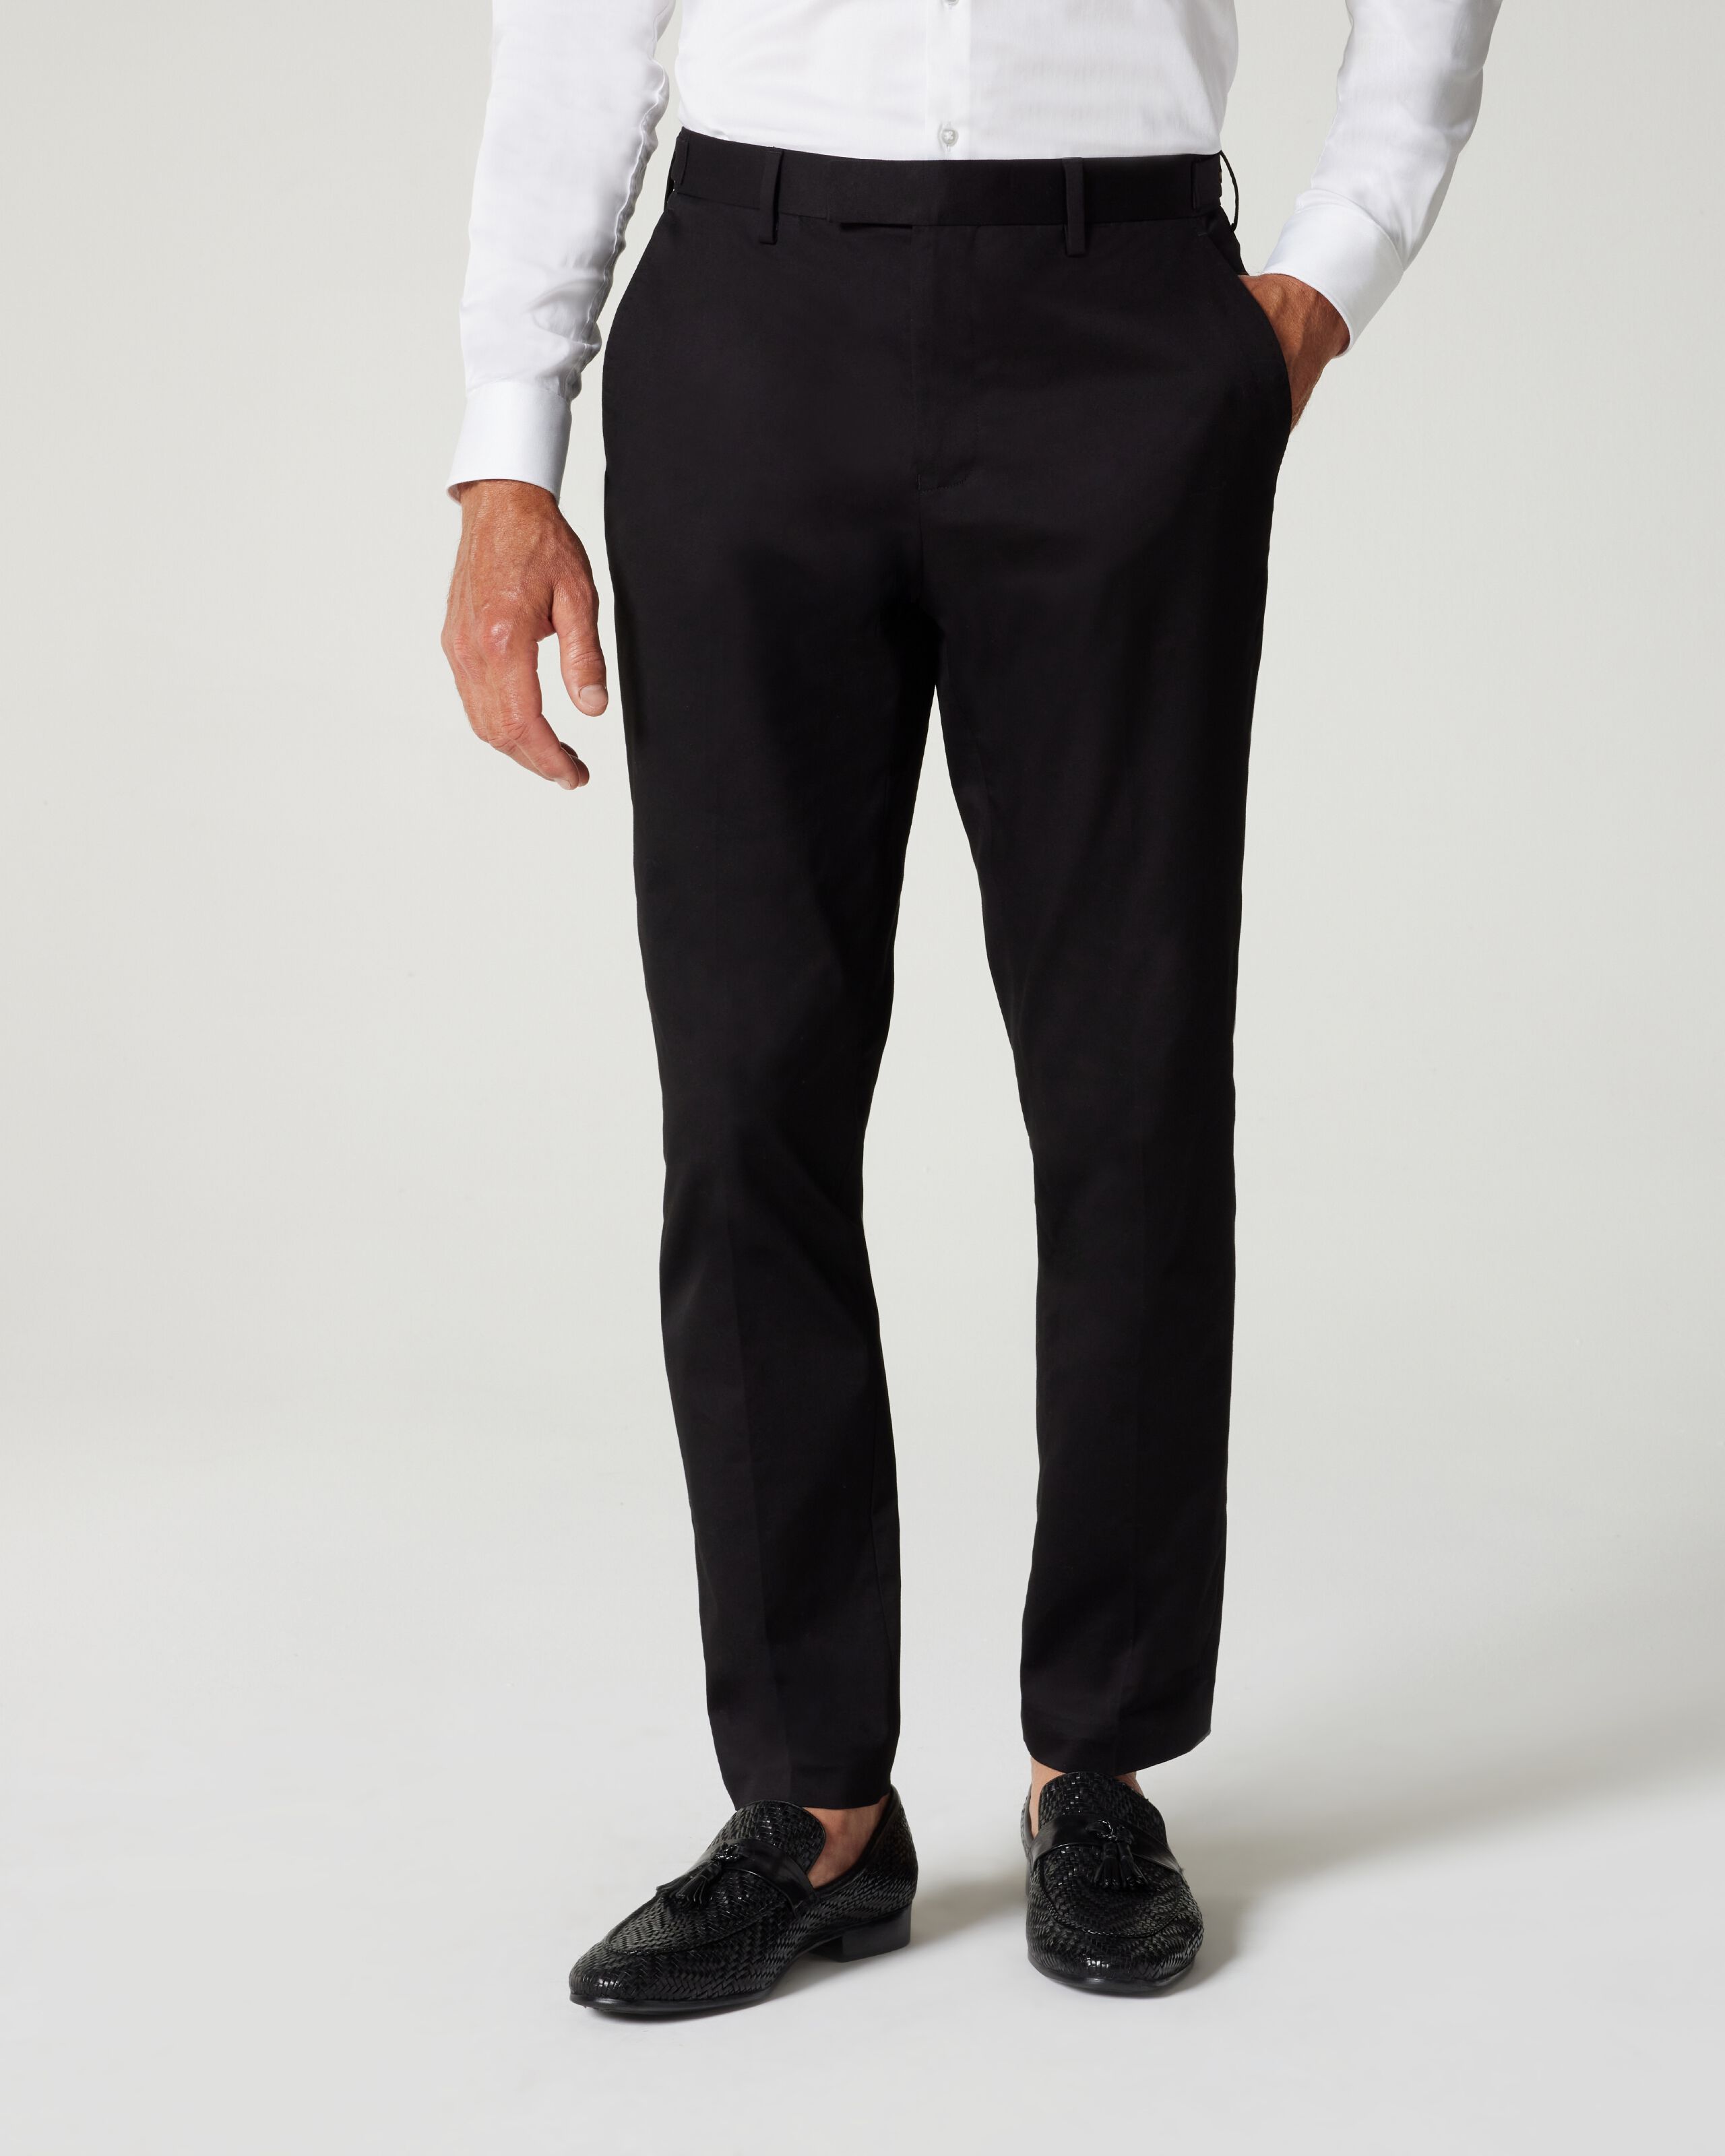 Casual Suit Pants Styling for Men